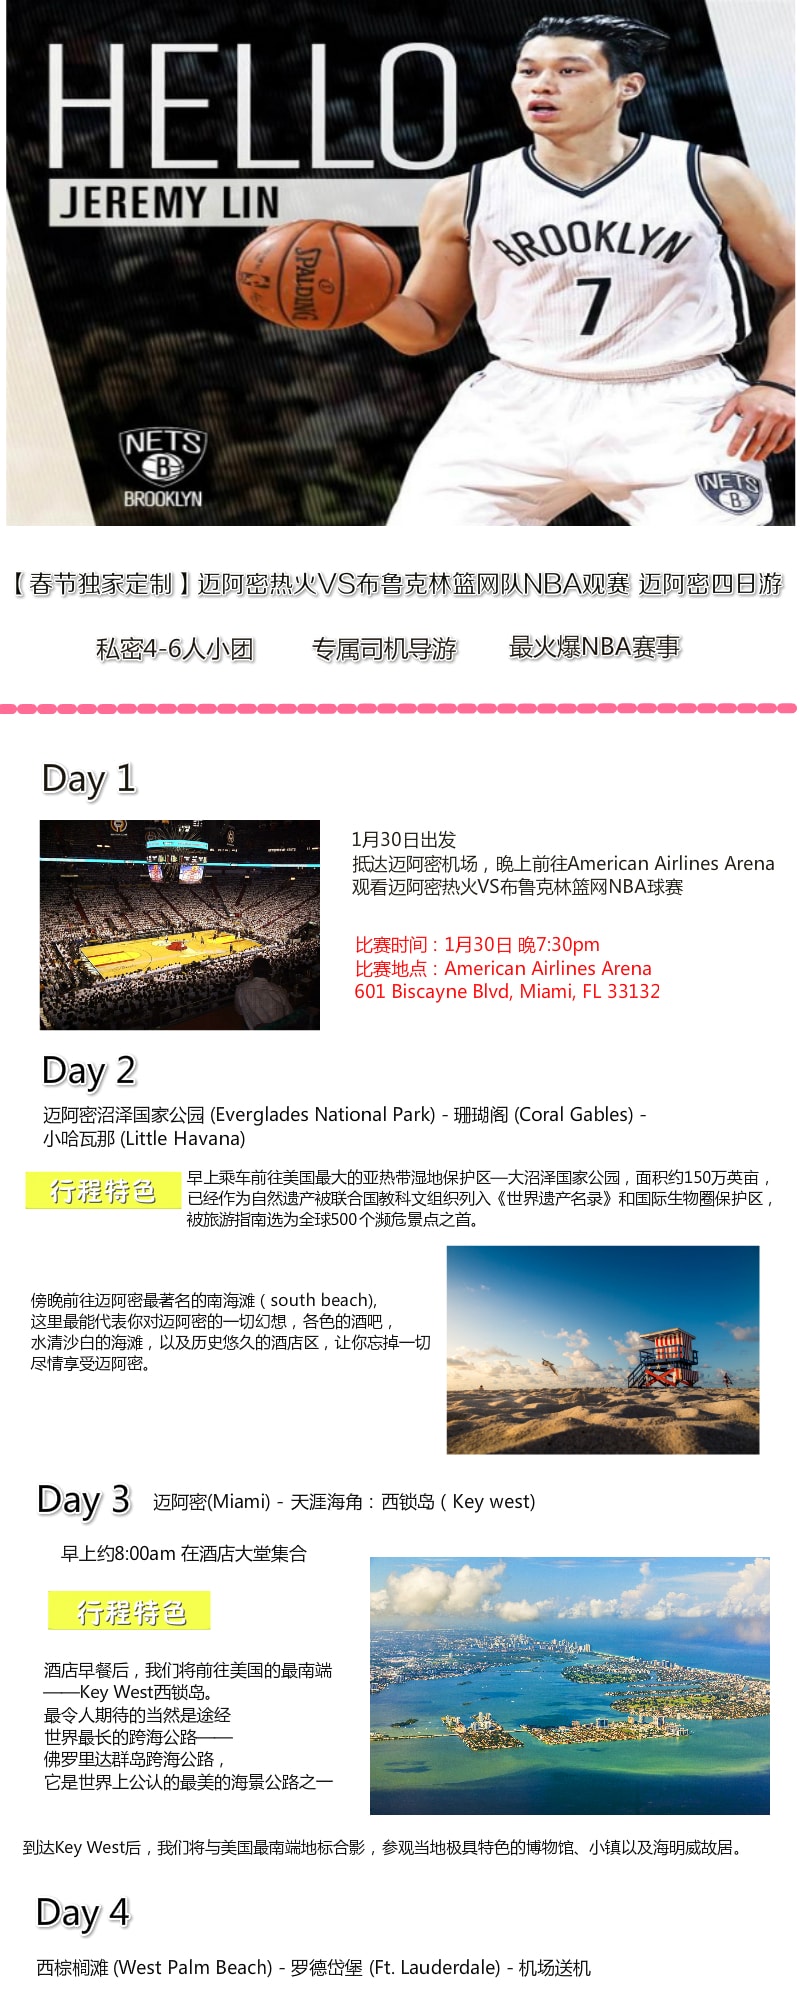 <Yamibuy Exclusive>Miami Heat VS Brooklyn Nets NBA Game + Miami + Key West 4 Day Tour (2 Guests in One Room $811/person)